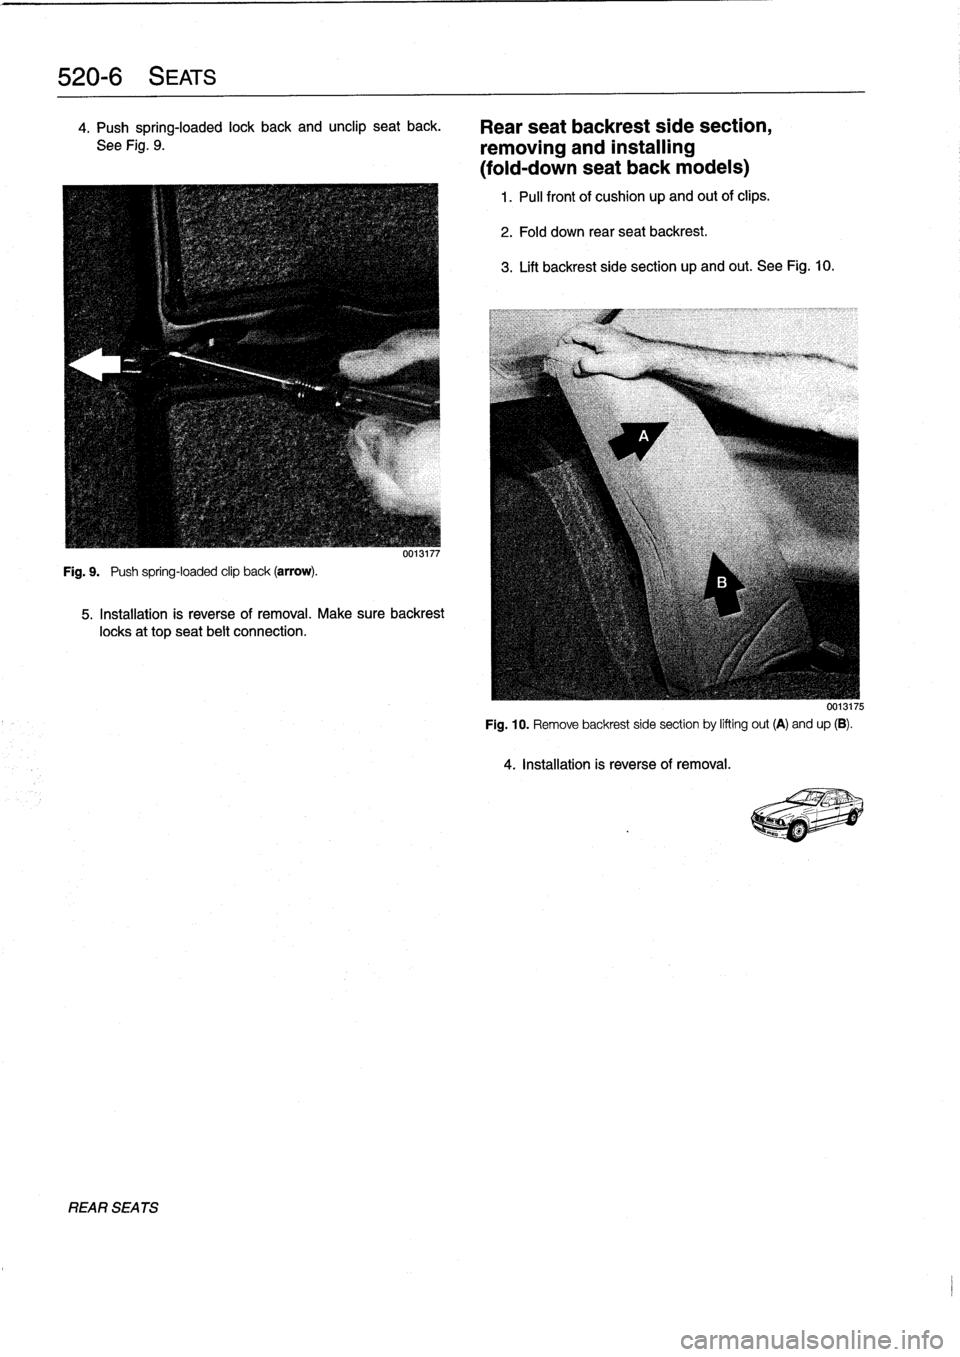 BMW 325i 1992 E36 Workshop Manual 
520-
6
SEATS

4
.
Push
spring-loaded
lock
back
and
unclip
seat
back
.

See
Fig
.
9
.

Fig
.
9
.

	

Push
spring-loaded
clip
back
(arrow)
.

UU13117

5
.
Installation
is
reverse
of
removal
.
Make
sure